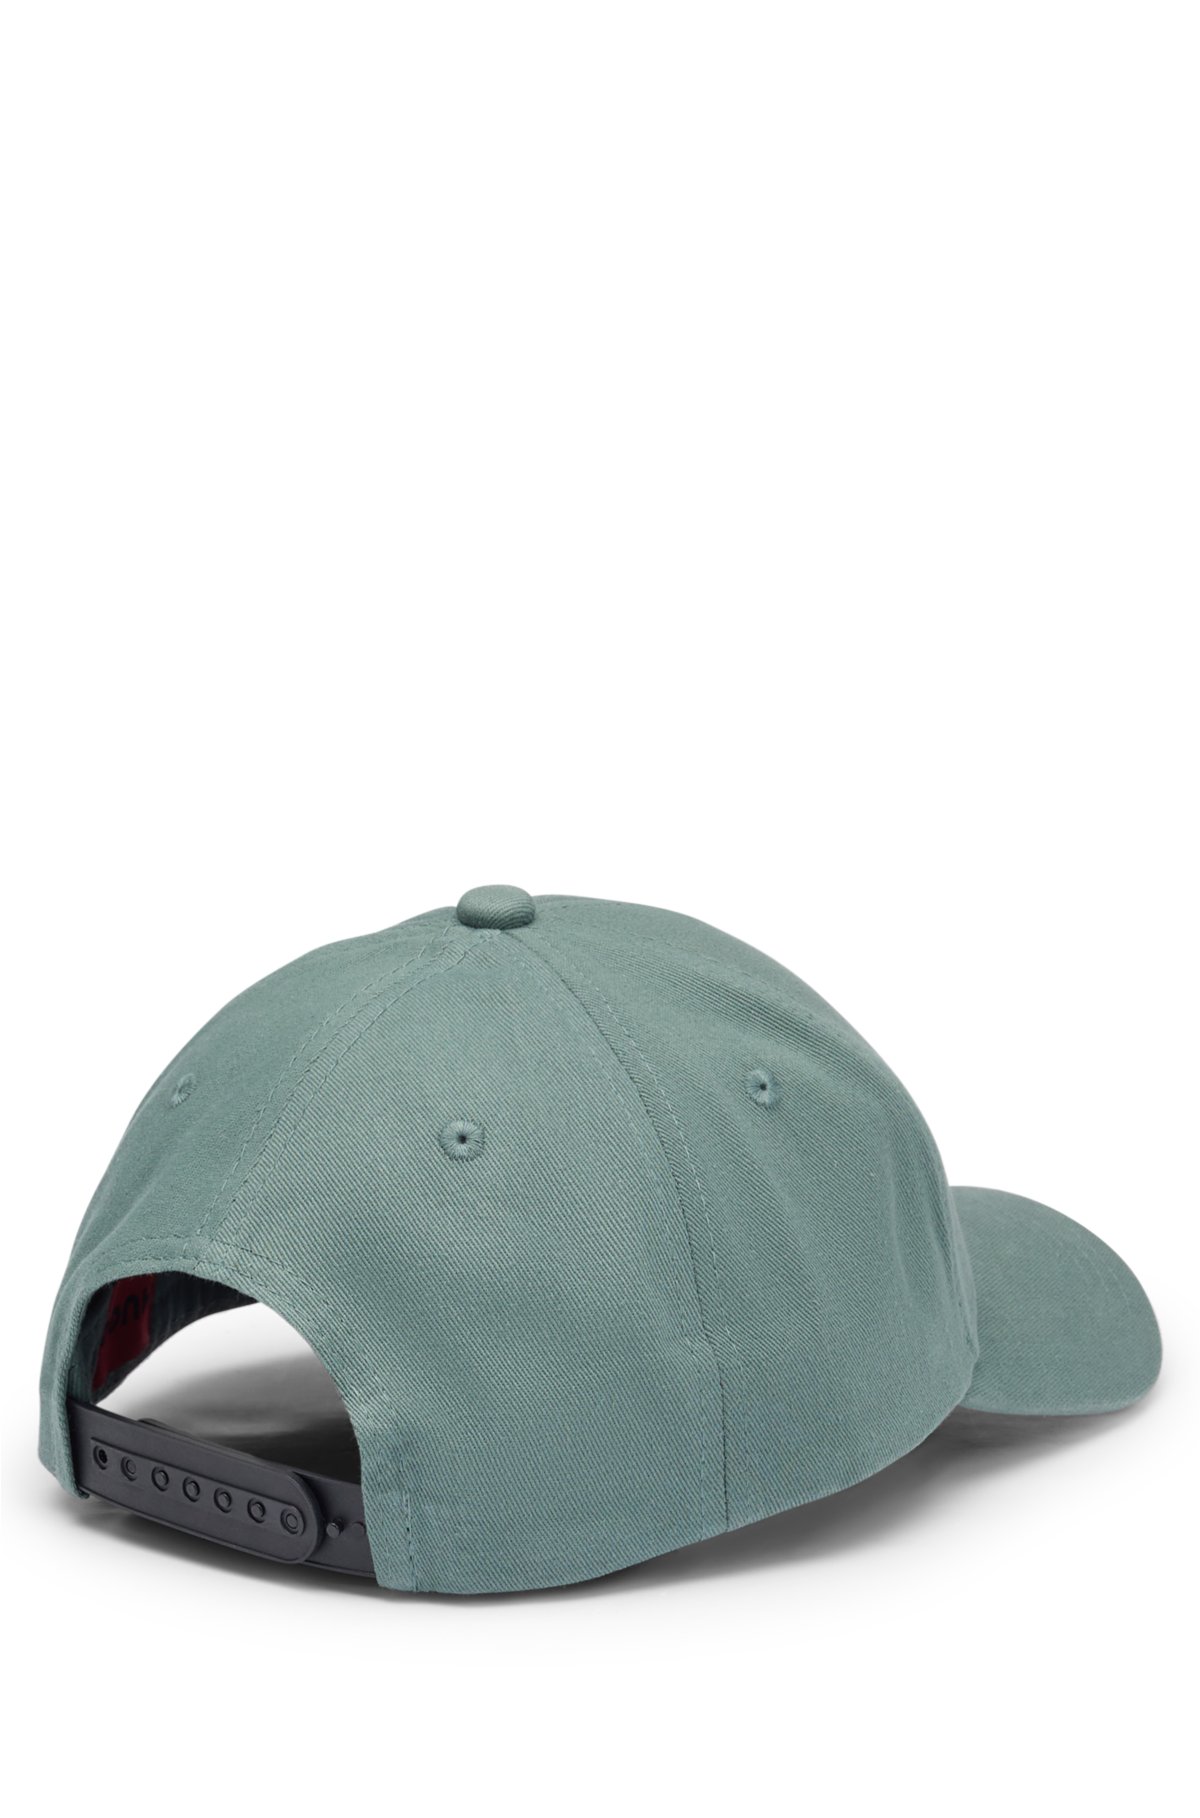 HUGO embroidered and logo snap cap with closure - Cotton-twill